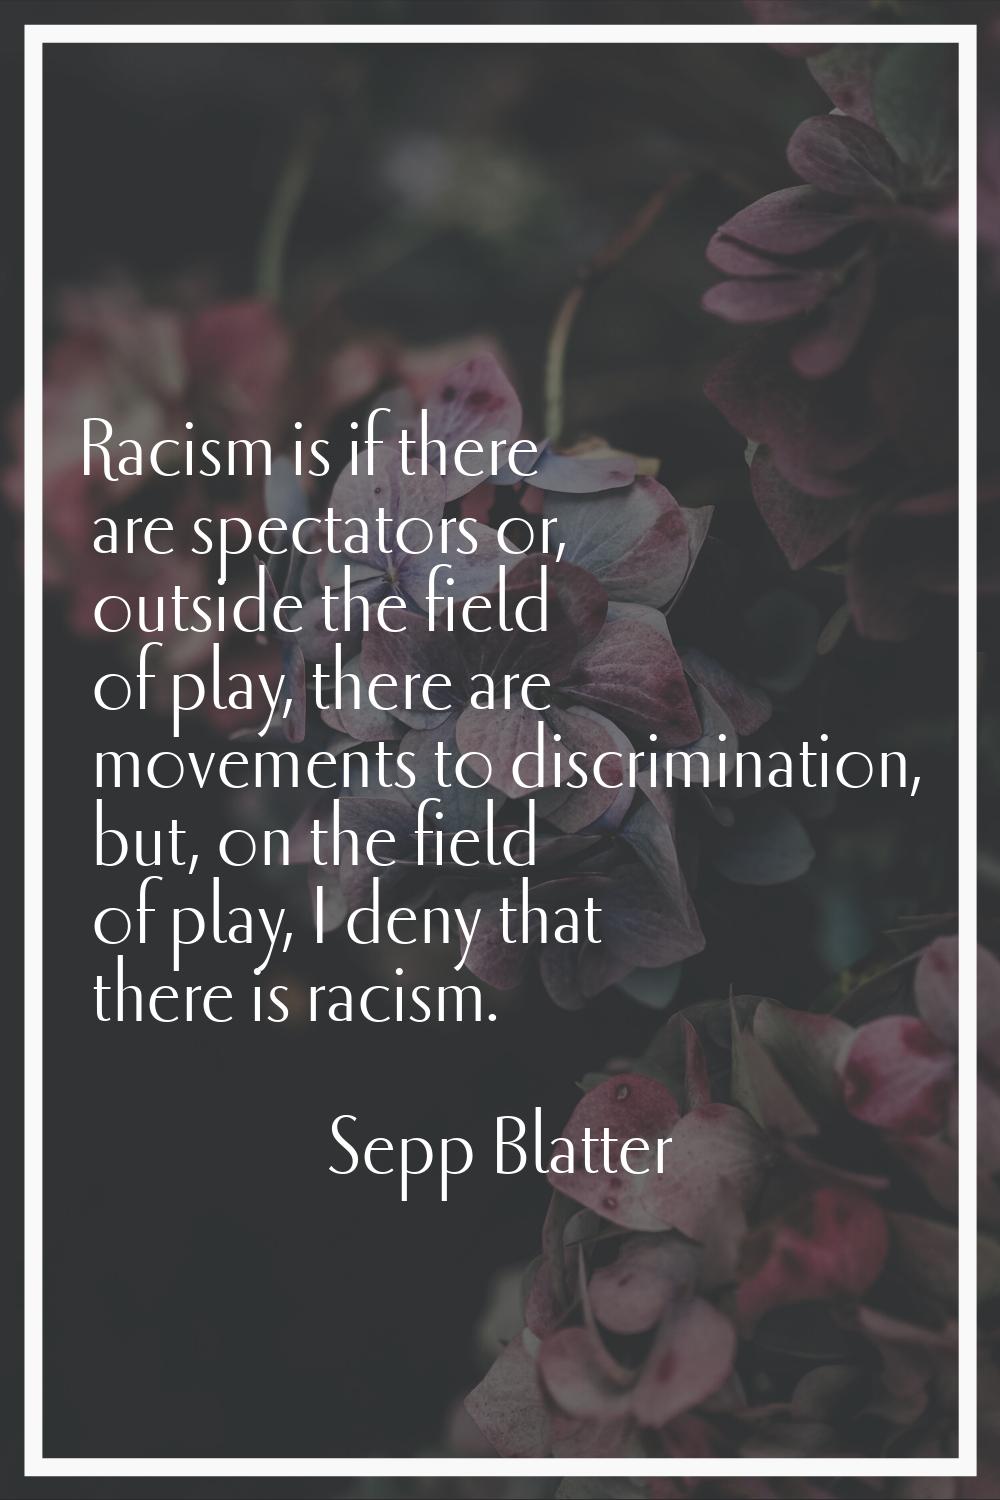 Racism is if there are spectators or, outside the field of play, there are movements to discriminat